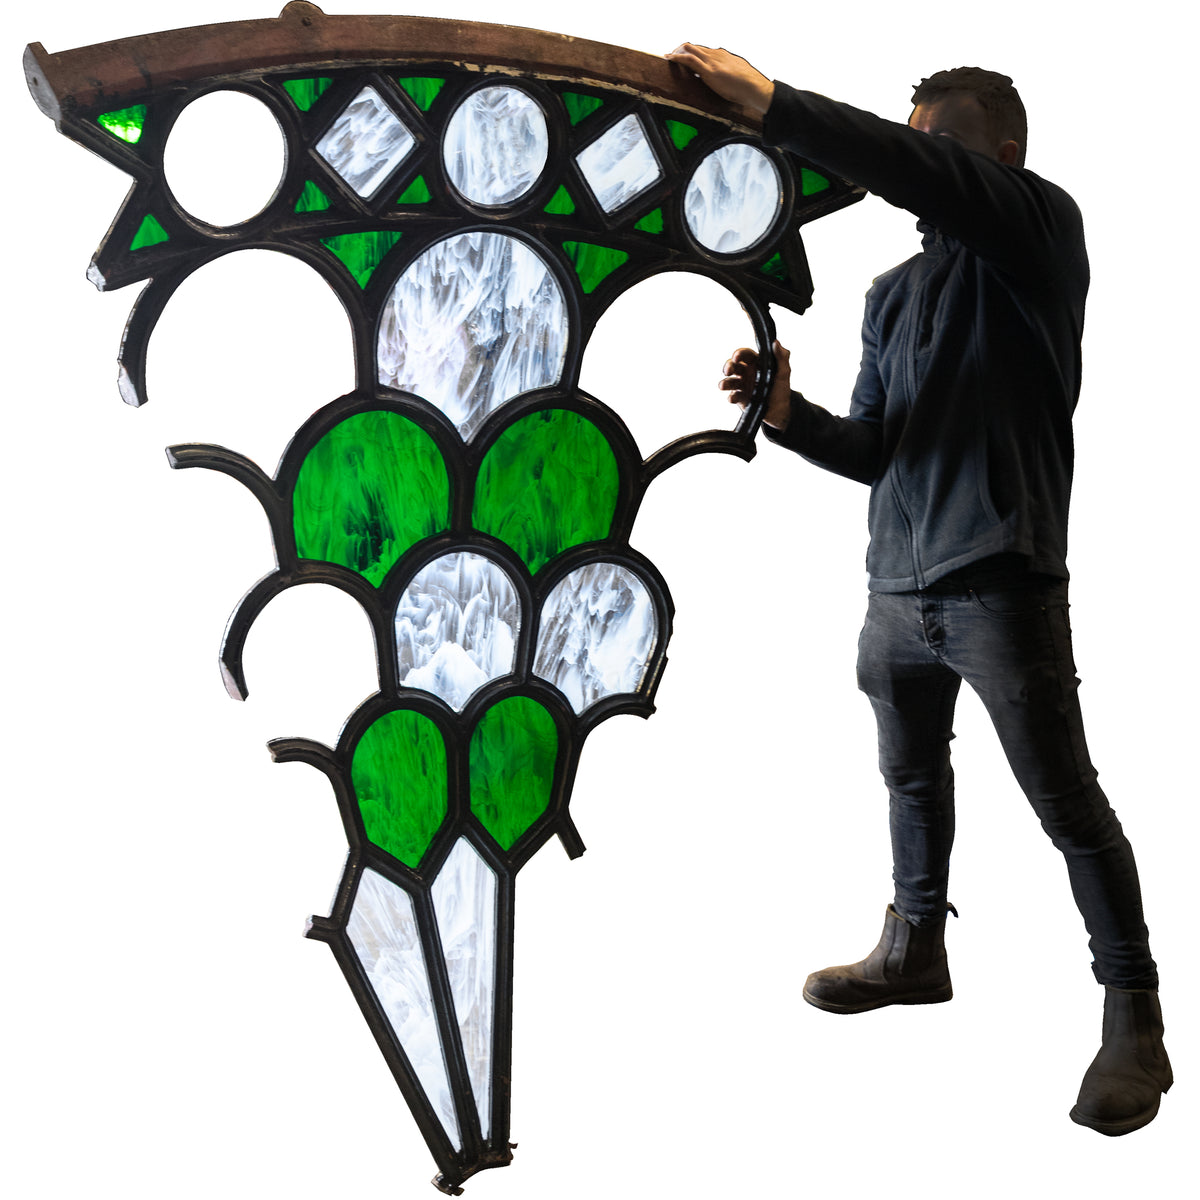 Magnificent Antique Domed Cast Iron Skylight with Stained Glass (3.5m) | The Architectural Forum